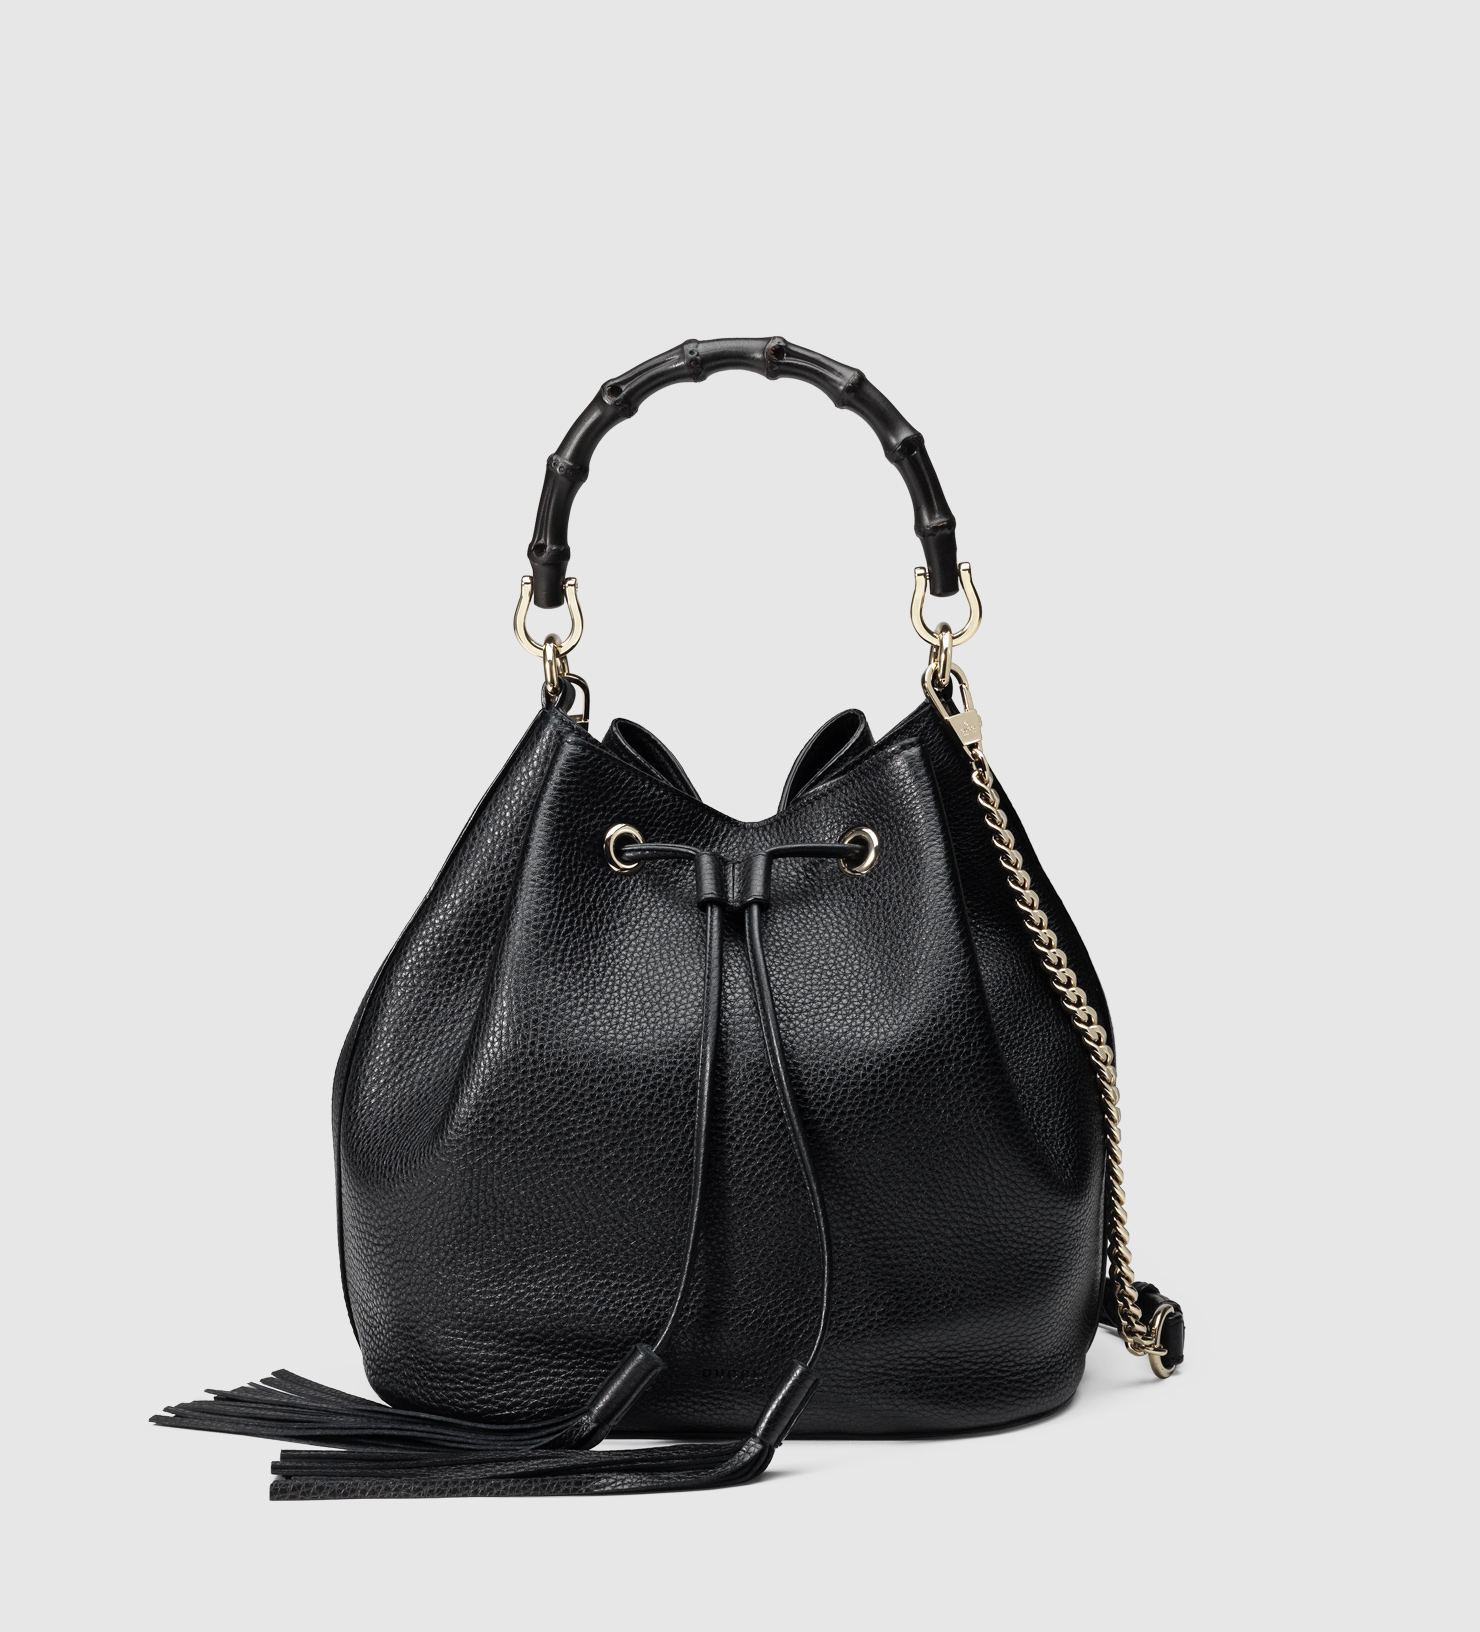 Gucci Miss Bamboo Leather Bucket Bag in Black (bamboo) | Lyst